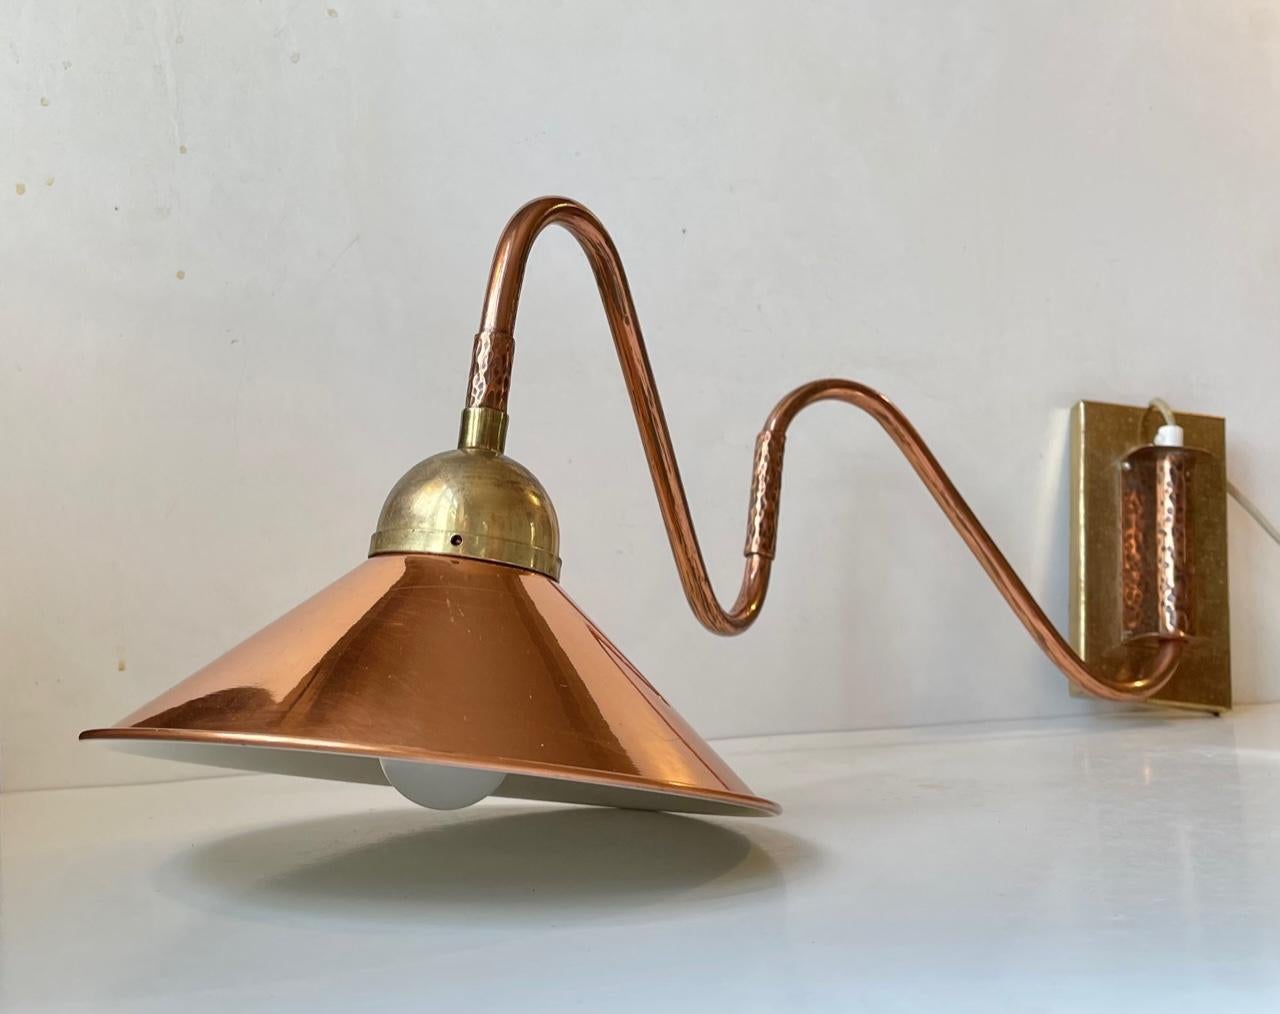 Fully adjustable wall lamp composed of solid brass, copper and featuring a copper shade with white reflective inner shade. It has a styling very much in line with nautical - maritime environments. It was manufactured during the 1960s probably by E.